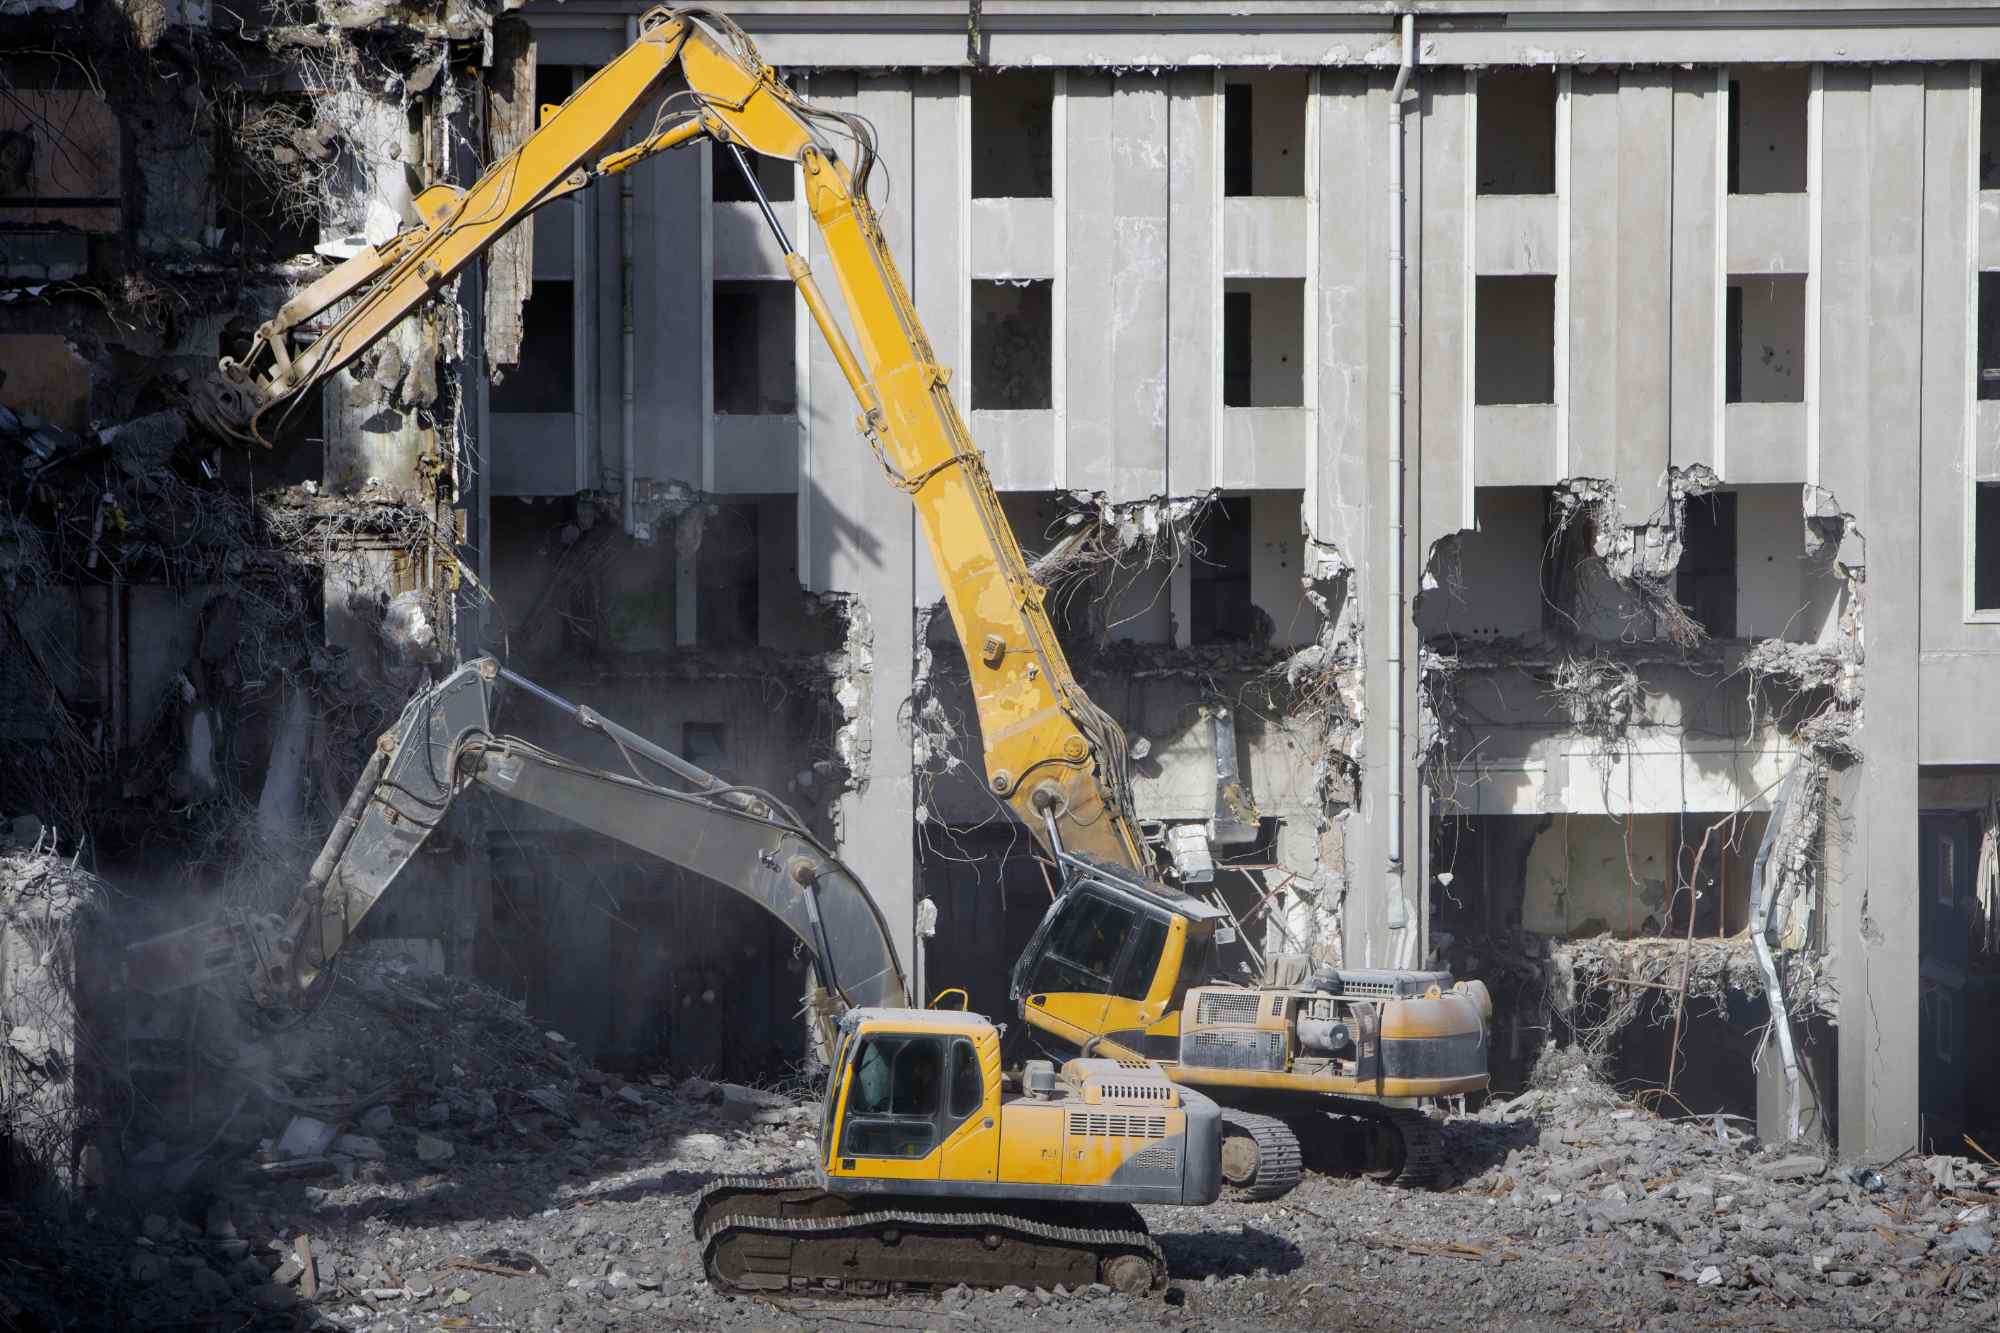 Building of the former hotel demolition for new construction, using a two special hydraulic excavator-destroyer. Complete highly mechanized demolition of building structures. Construction site